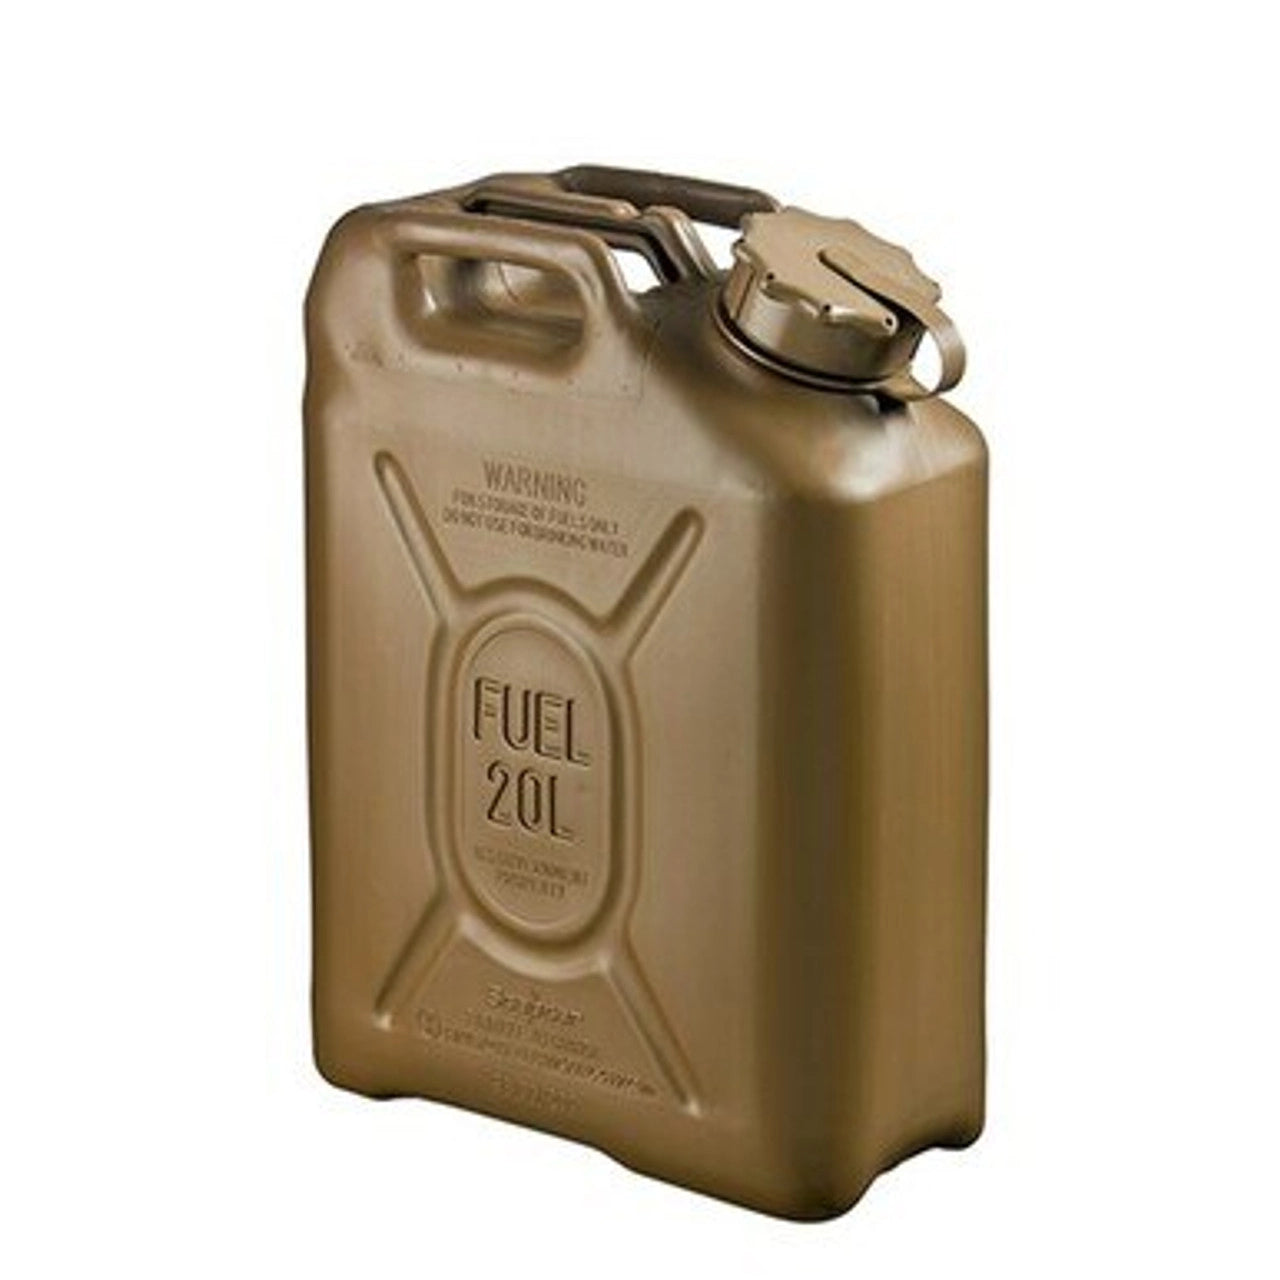 Scepter Military Fuel Canister 20L